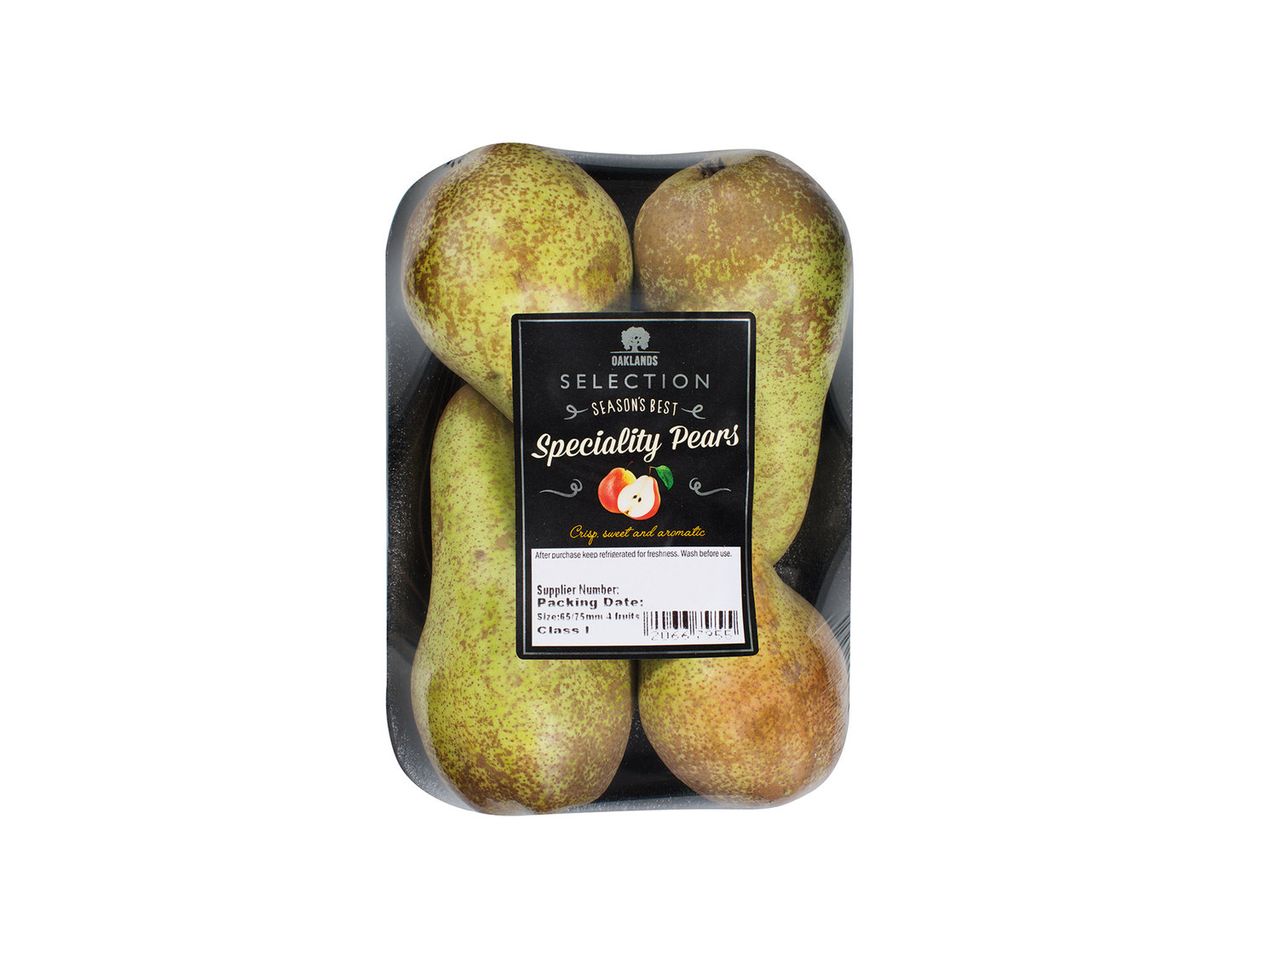 Go to full screen view: Oaklands Speciality Pears - Image 1